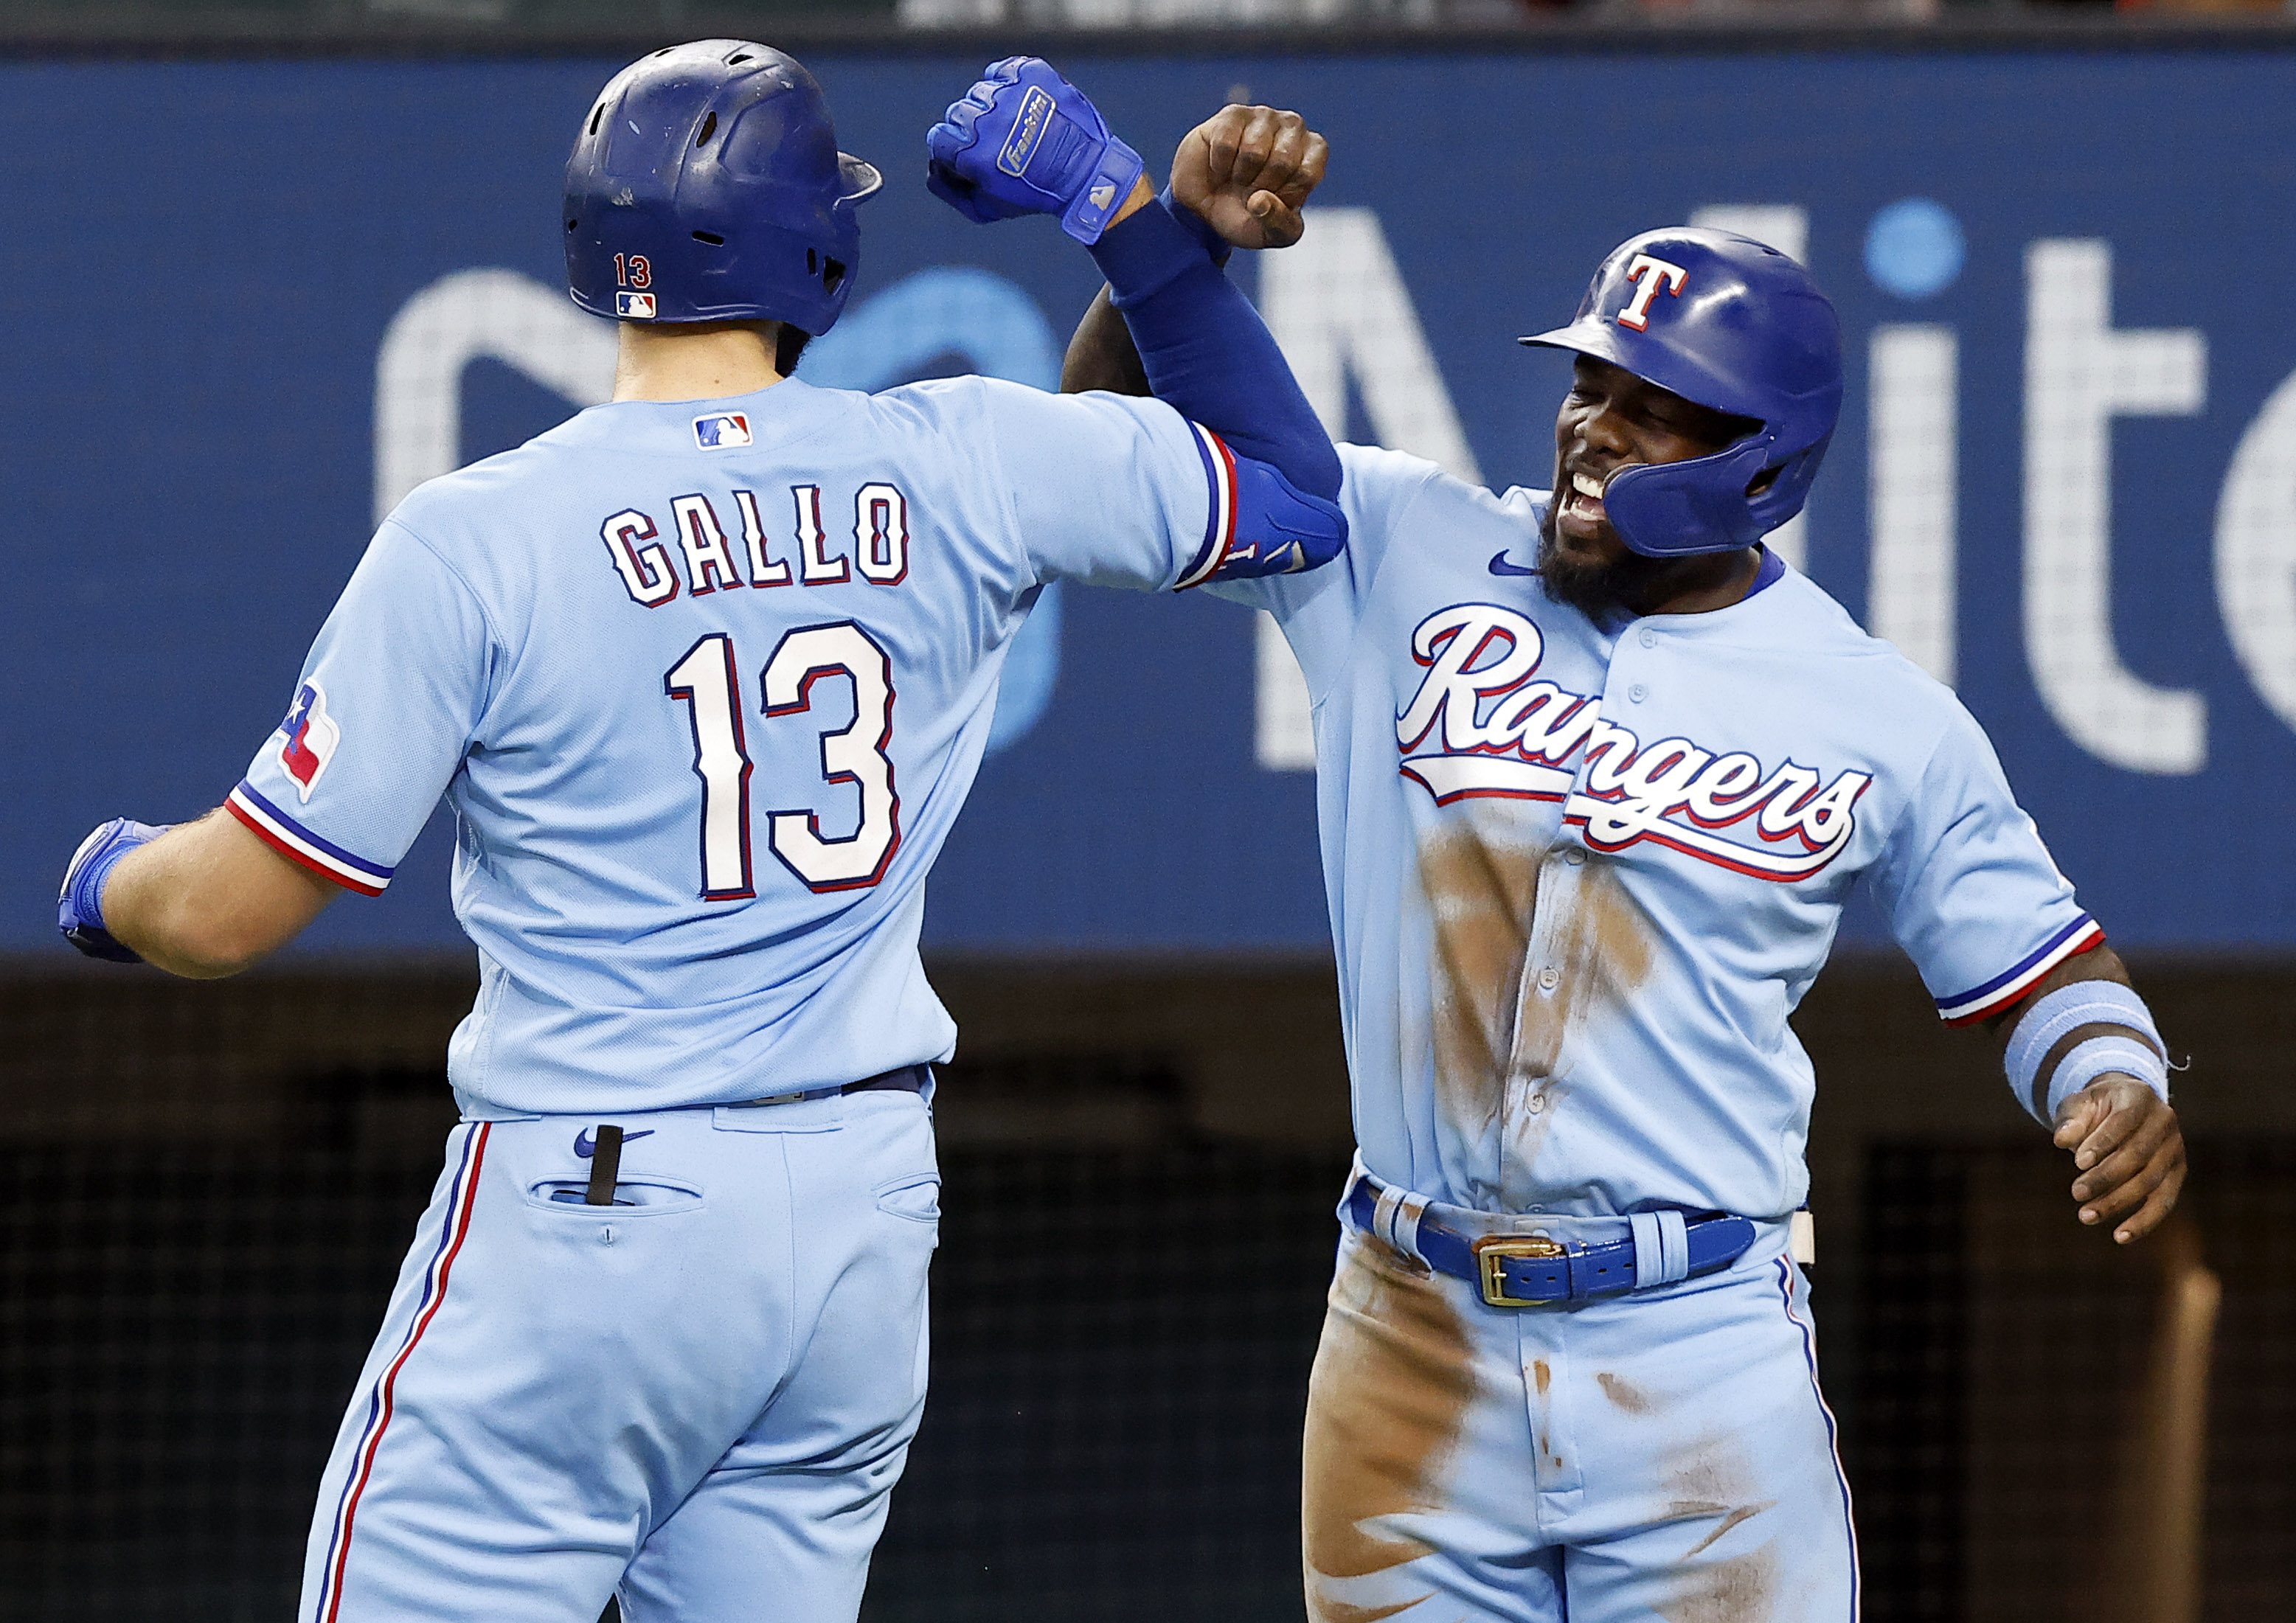 Rangers' offense breaks out as MLB cracks down on pitchers? What a